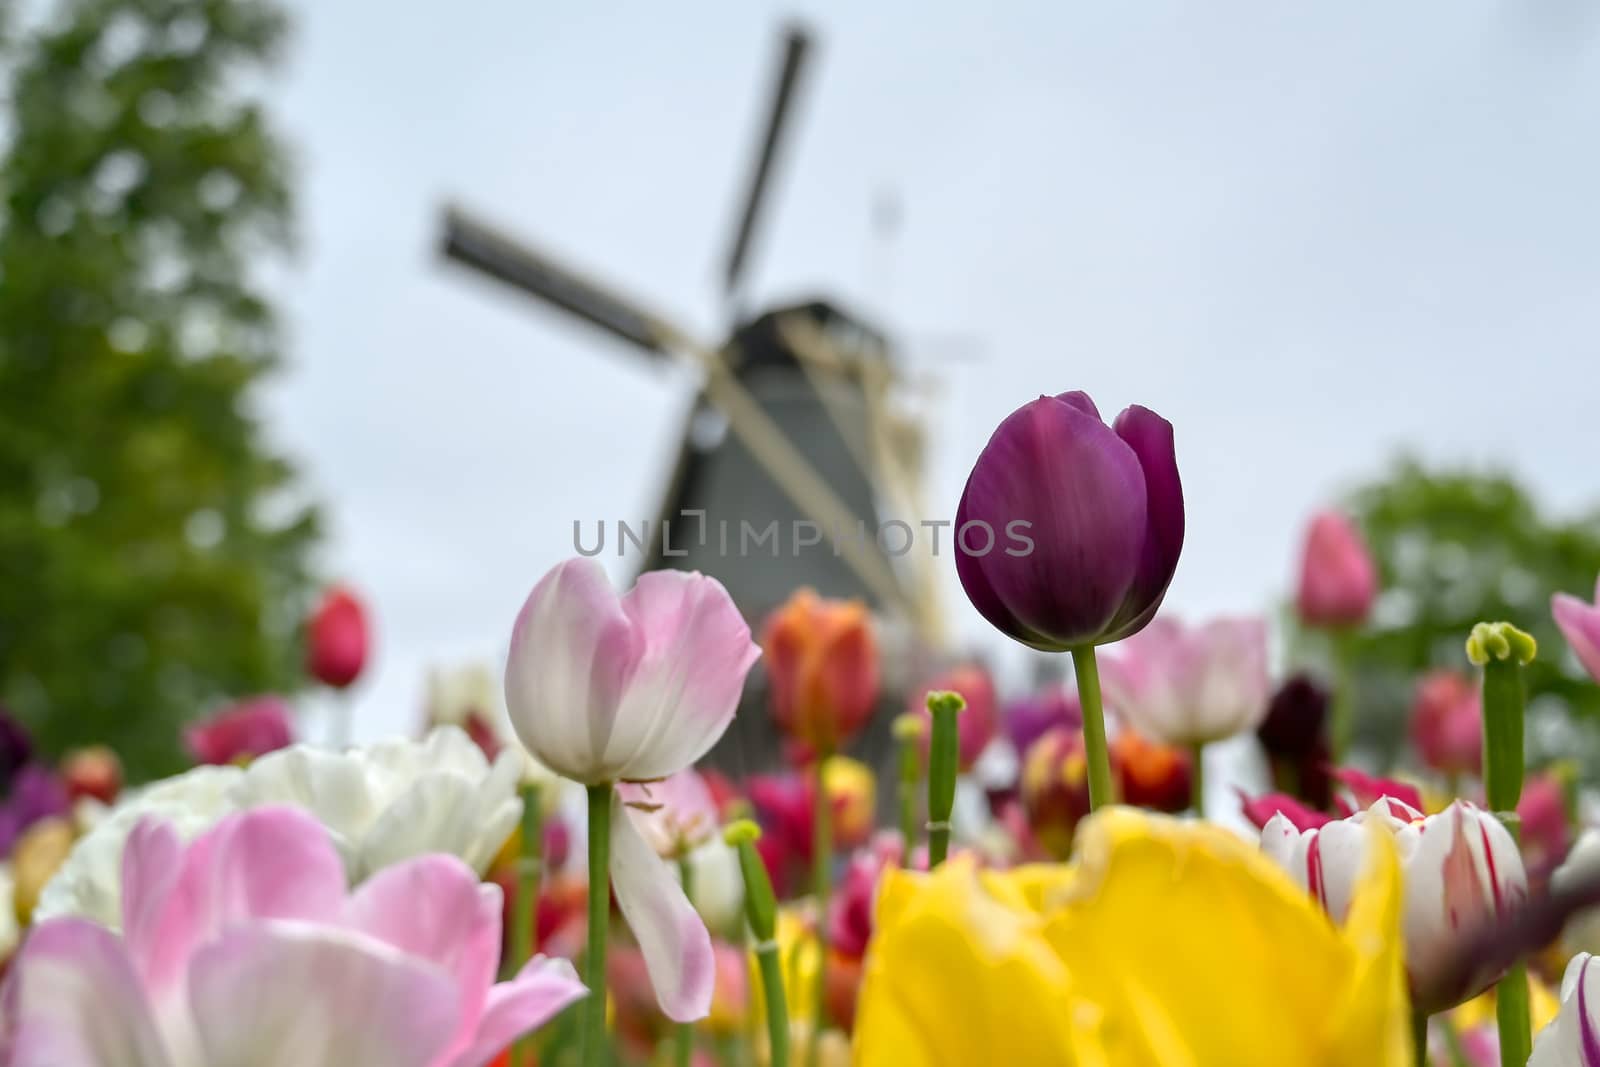 Tulips and windmills in Holland by jbyard22